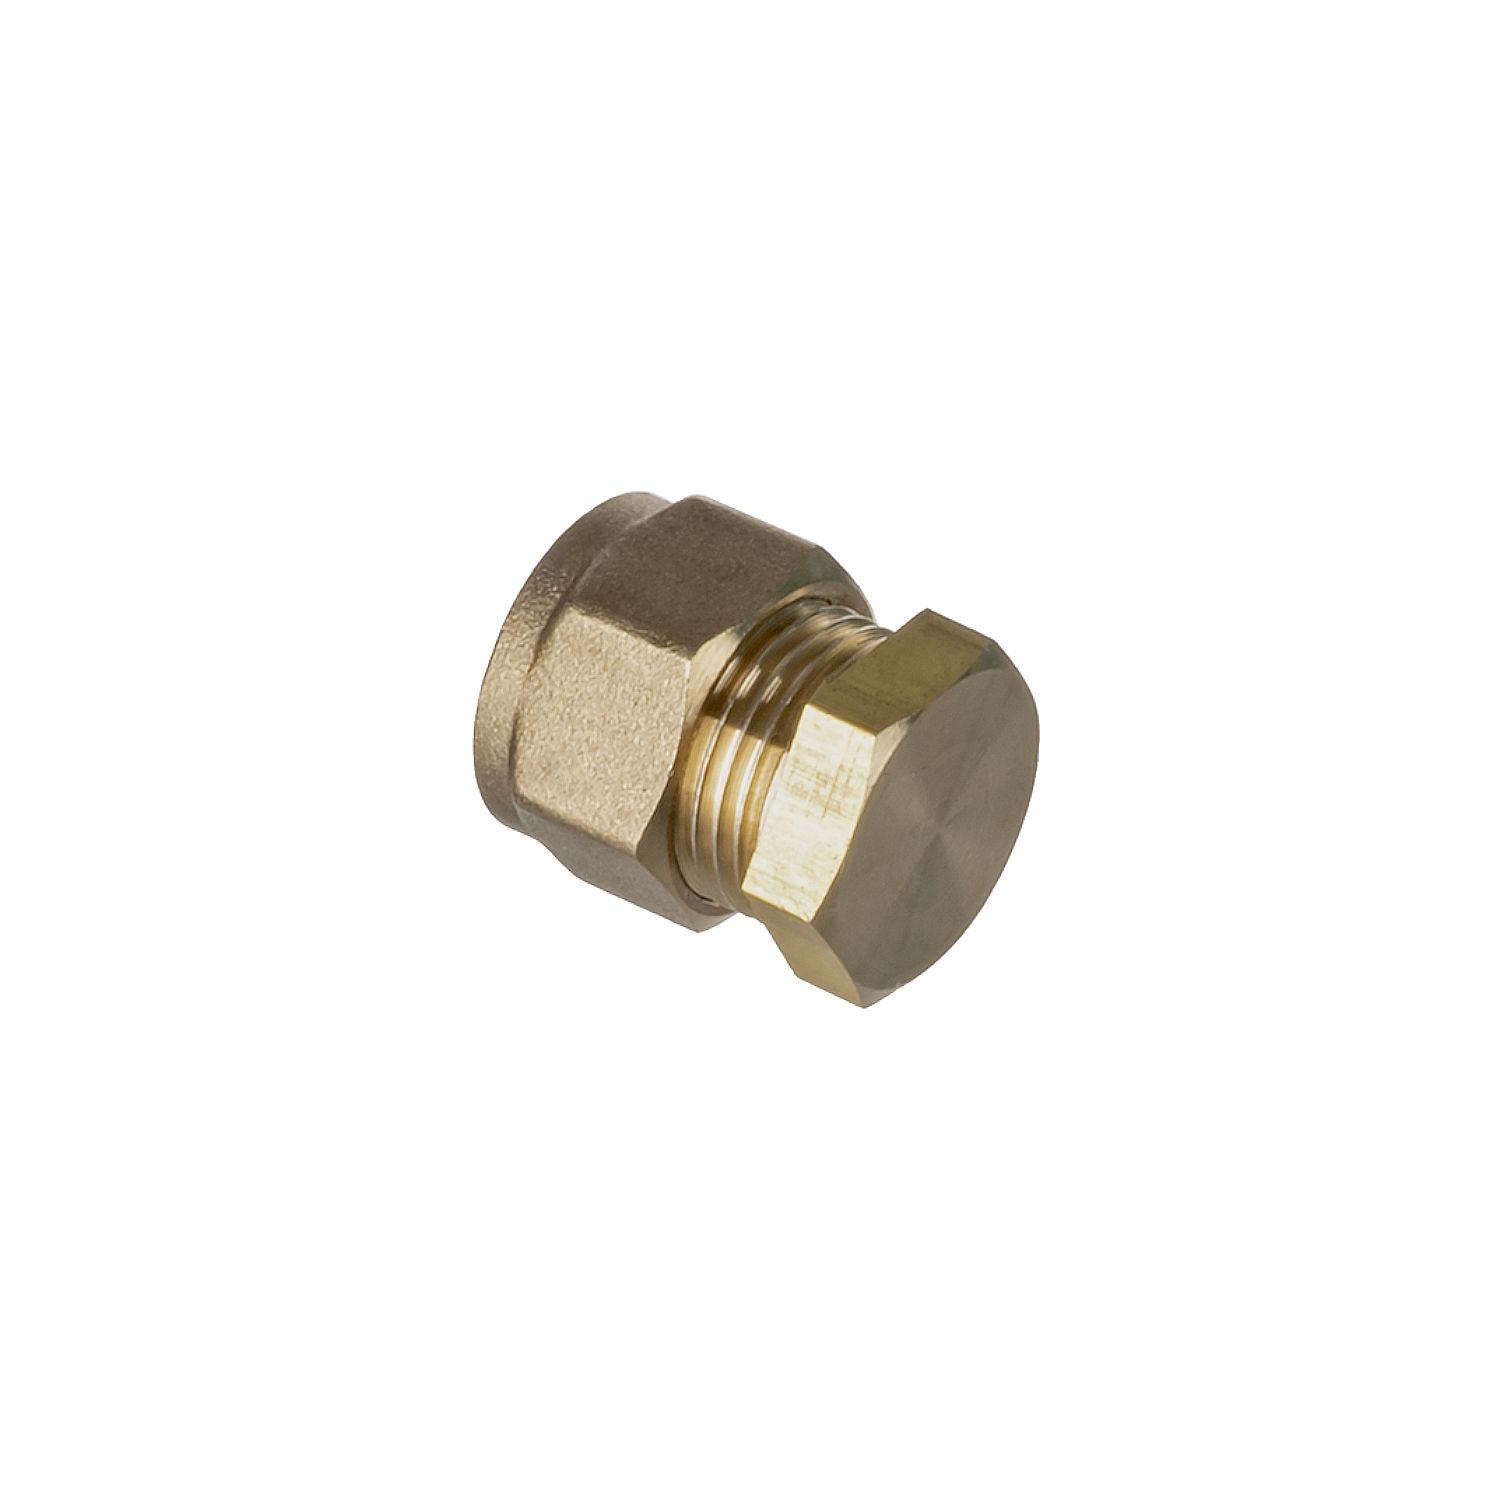 10mm Brass Compression fittings for Copper Plumbing Pipe Hot & Cold Systems